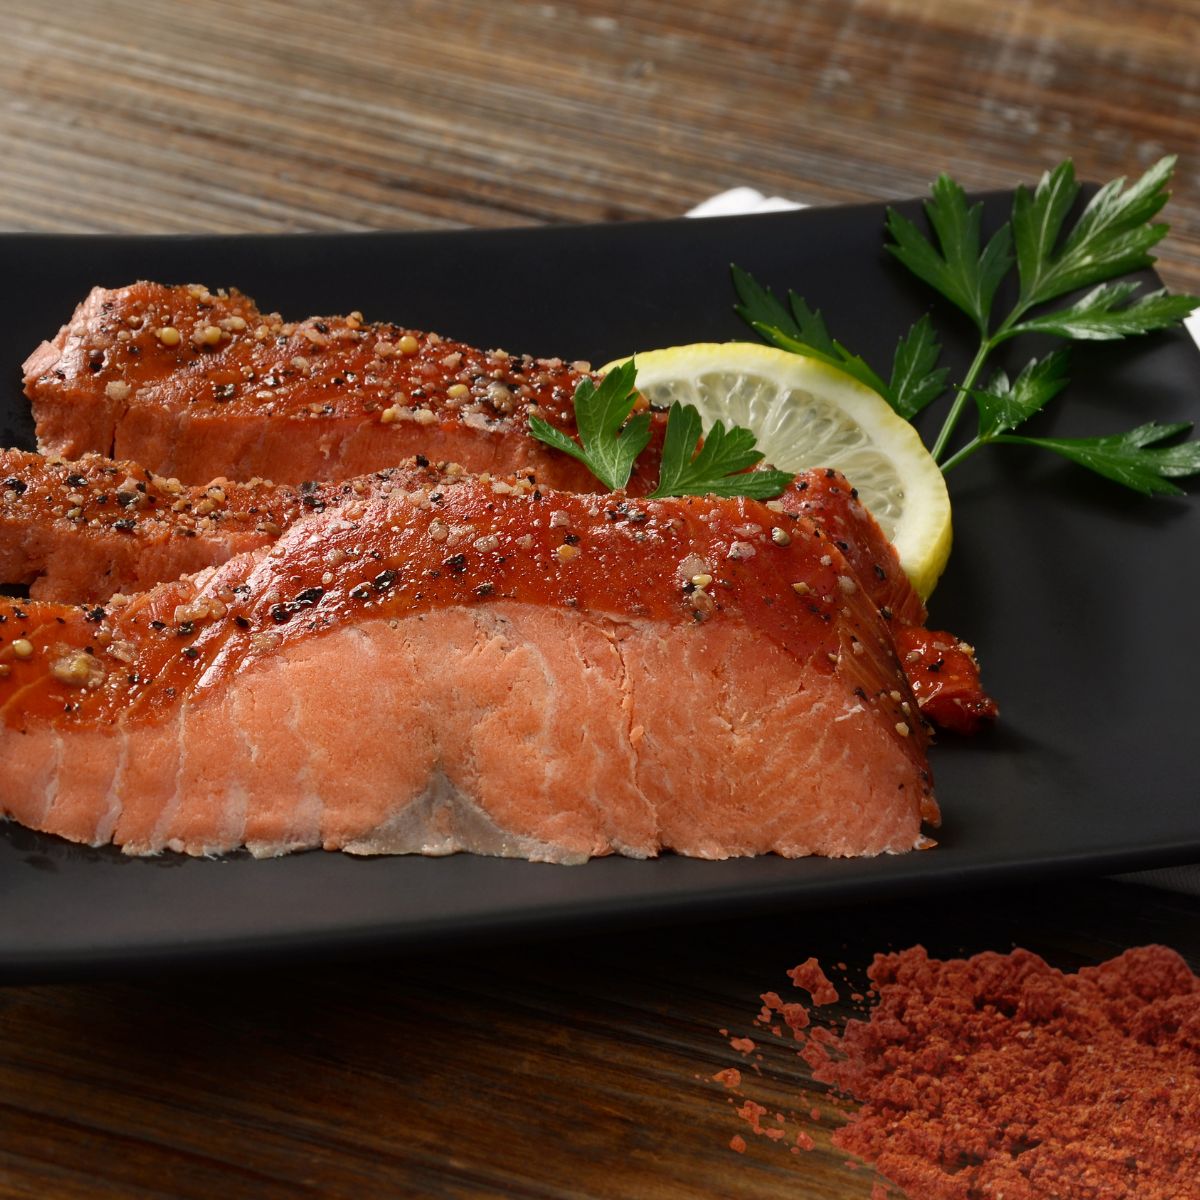 Salmon flavored with smoked paprika.